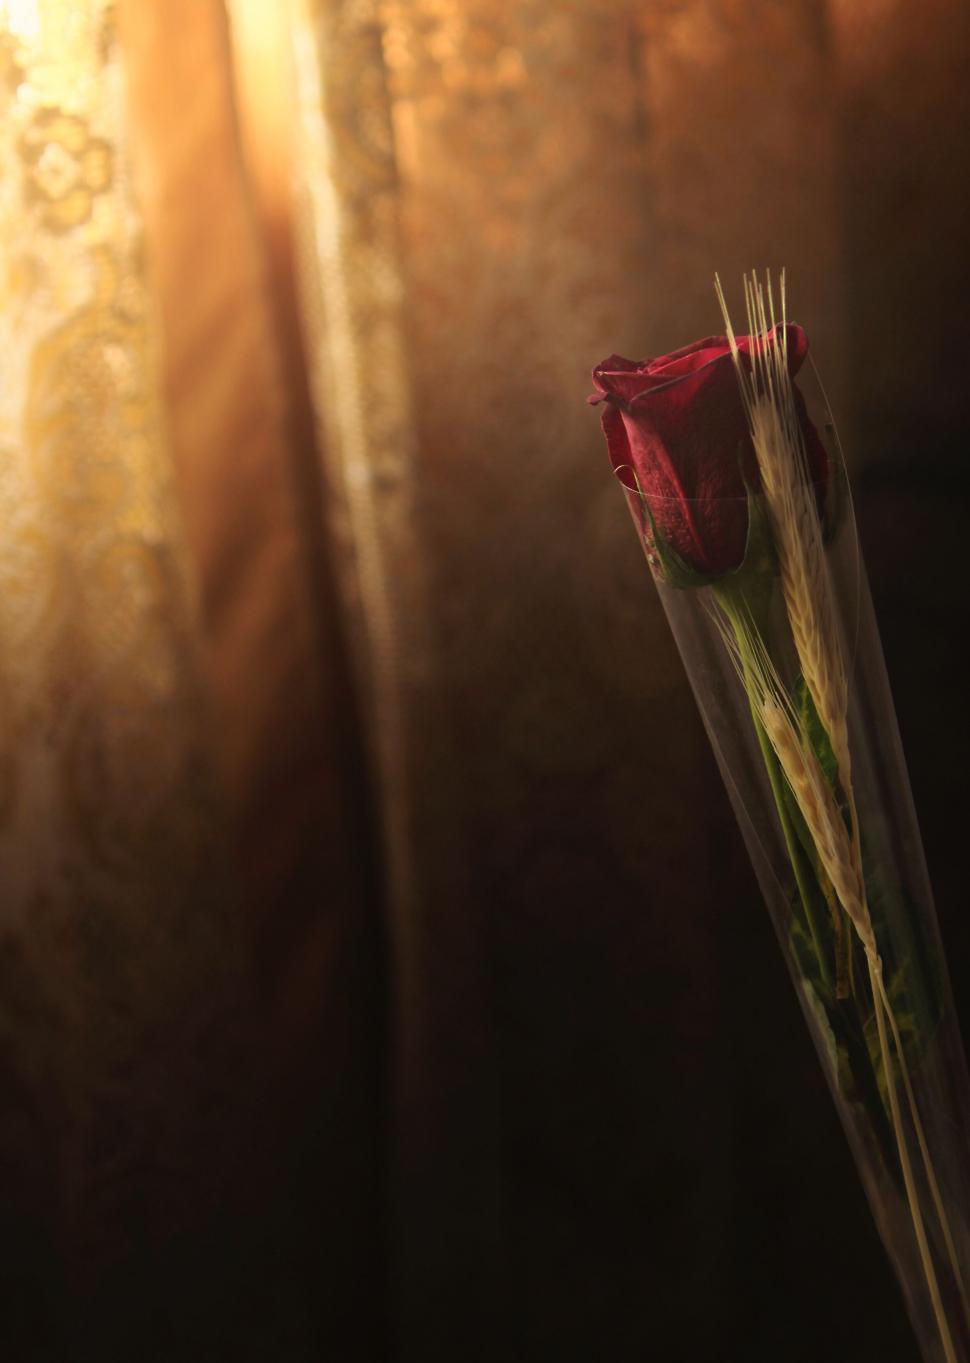 Free Image of Single red rose against soft background 